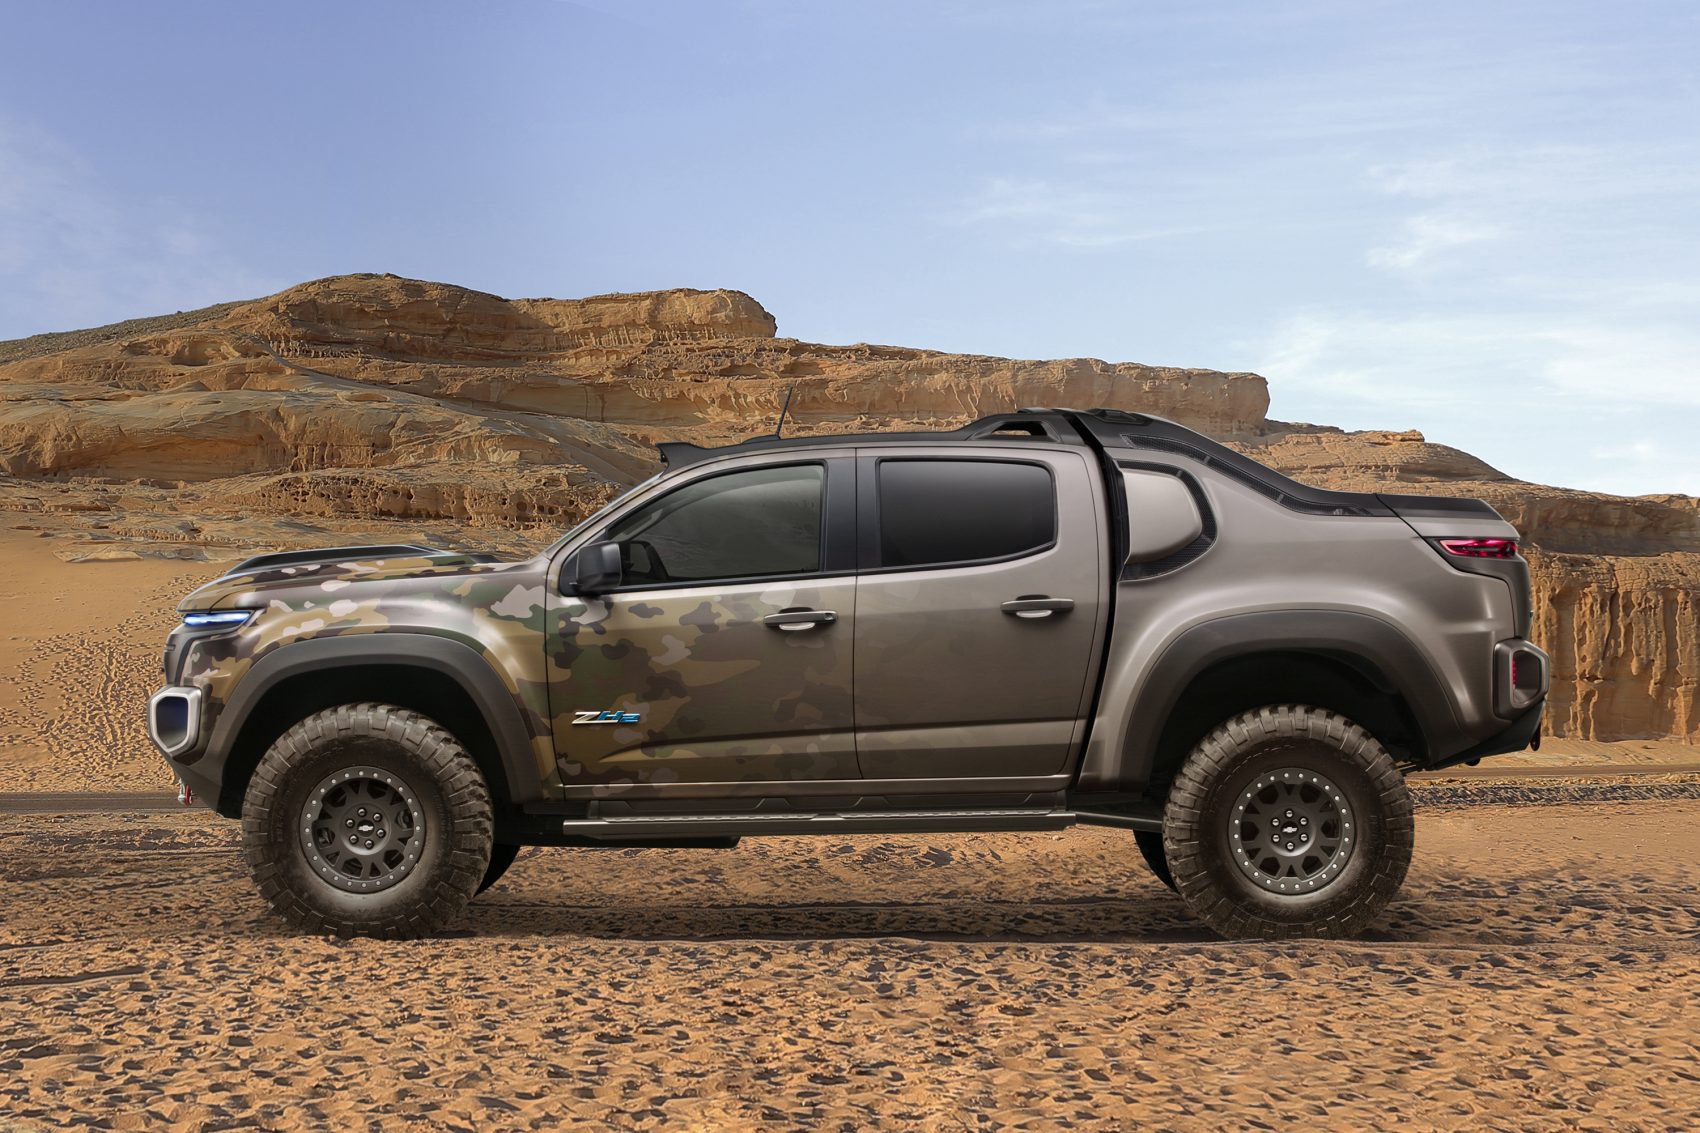 The Chevrolet Colorado ZH2 fuel cell electric vehicle, a concept that marries fuel cell technology and its advantages of on-board water production, exportable electric power and near silent operation with extreme off-road capability. (Courtesy General Motors)